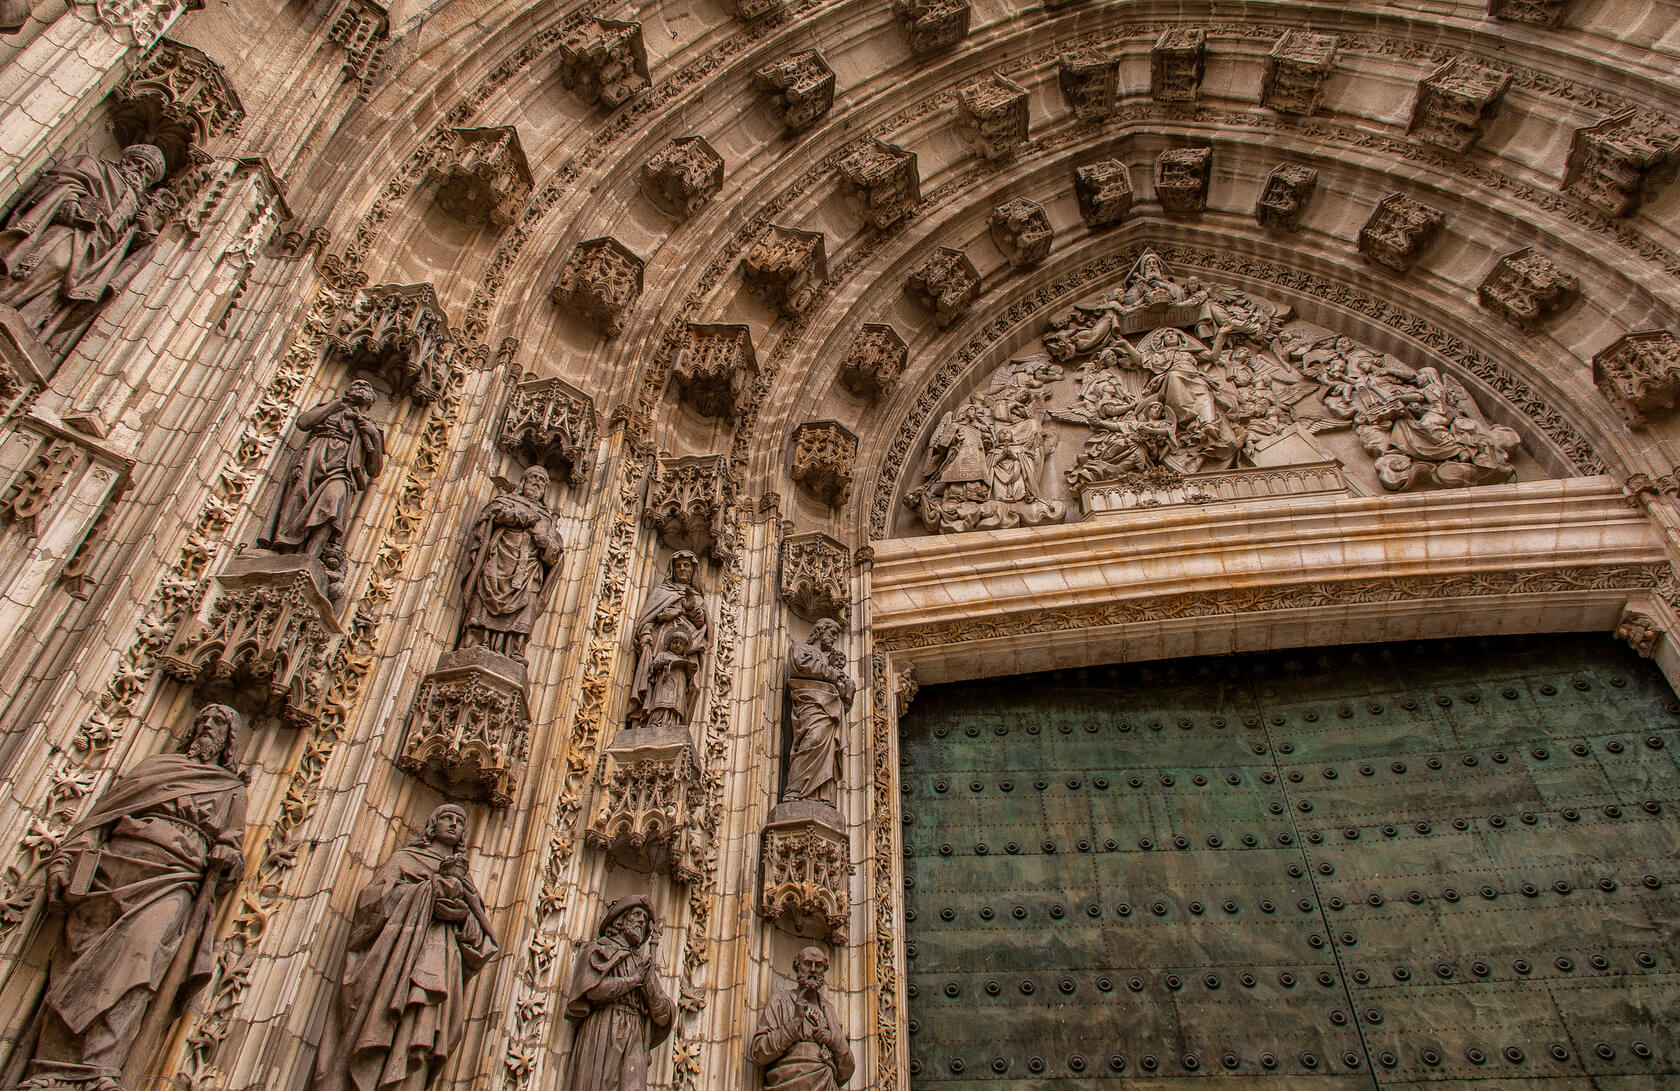 Seville, Andalusia, Spain. April 25, 2019. Almost a dozen access doors to the Cathedral of Seville. This one in particular, that of the Assumption is one of the most spectacular.